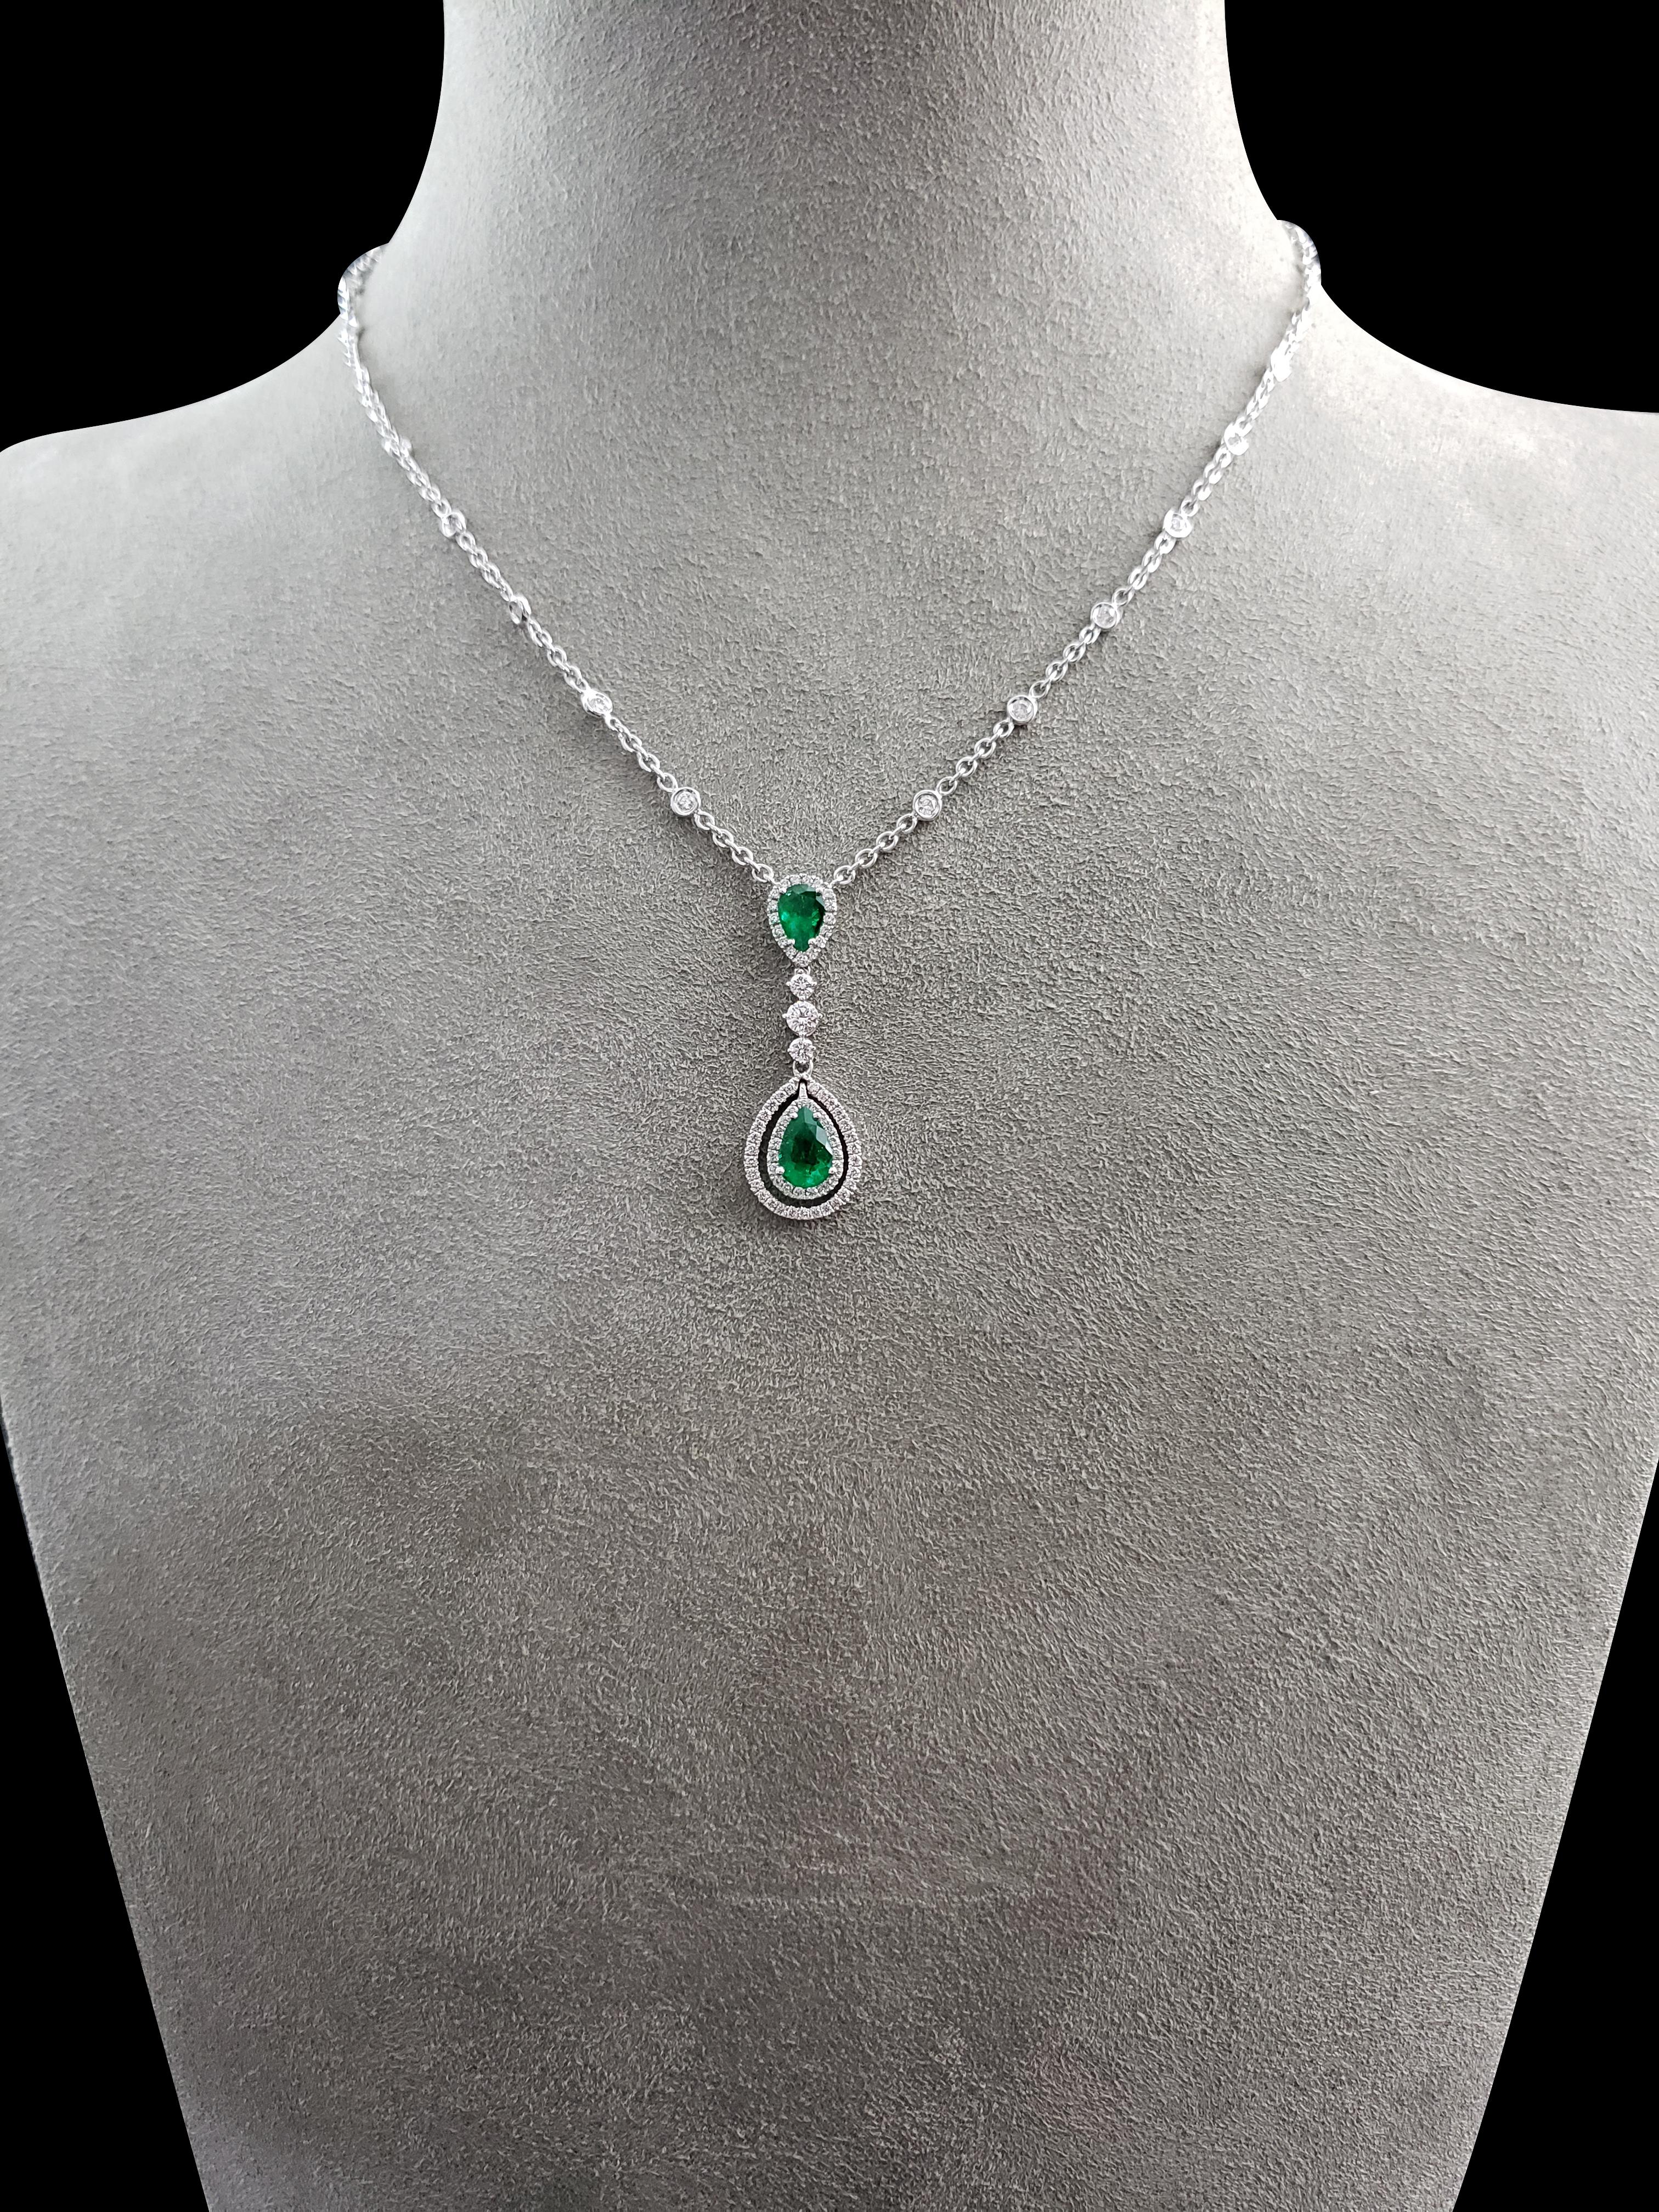 A vibrant pear shape emerald surrounded by 2 rows of sparkling round diamonds, elegantly suspends from another pear shape emerald in a diamond encrusted halo. Each emerald is spaced by a single solitaire diamond. The green emeralds weigh 1.09 carats